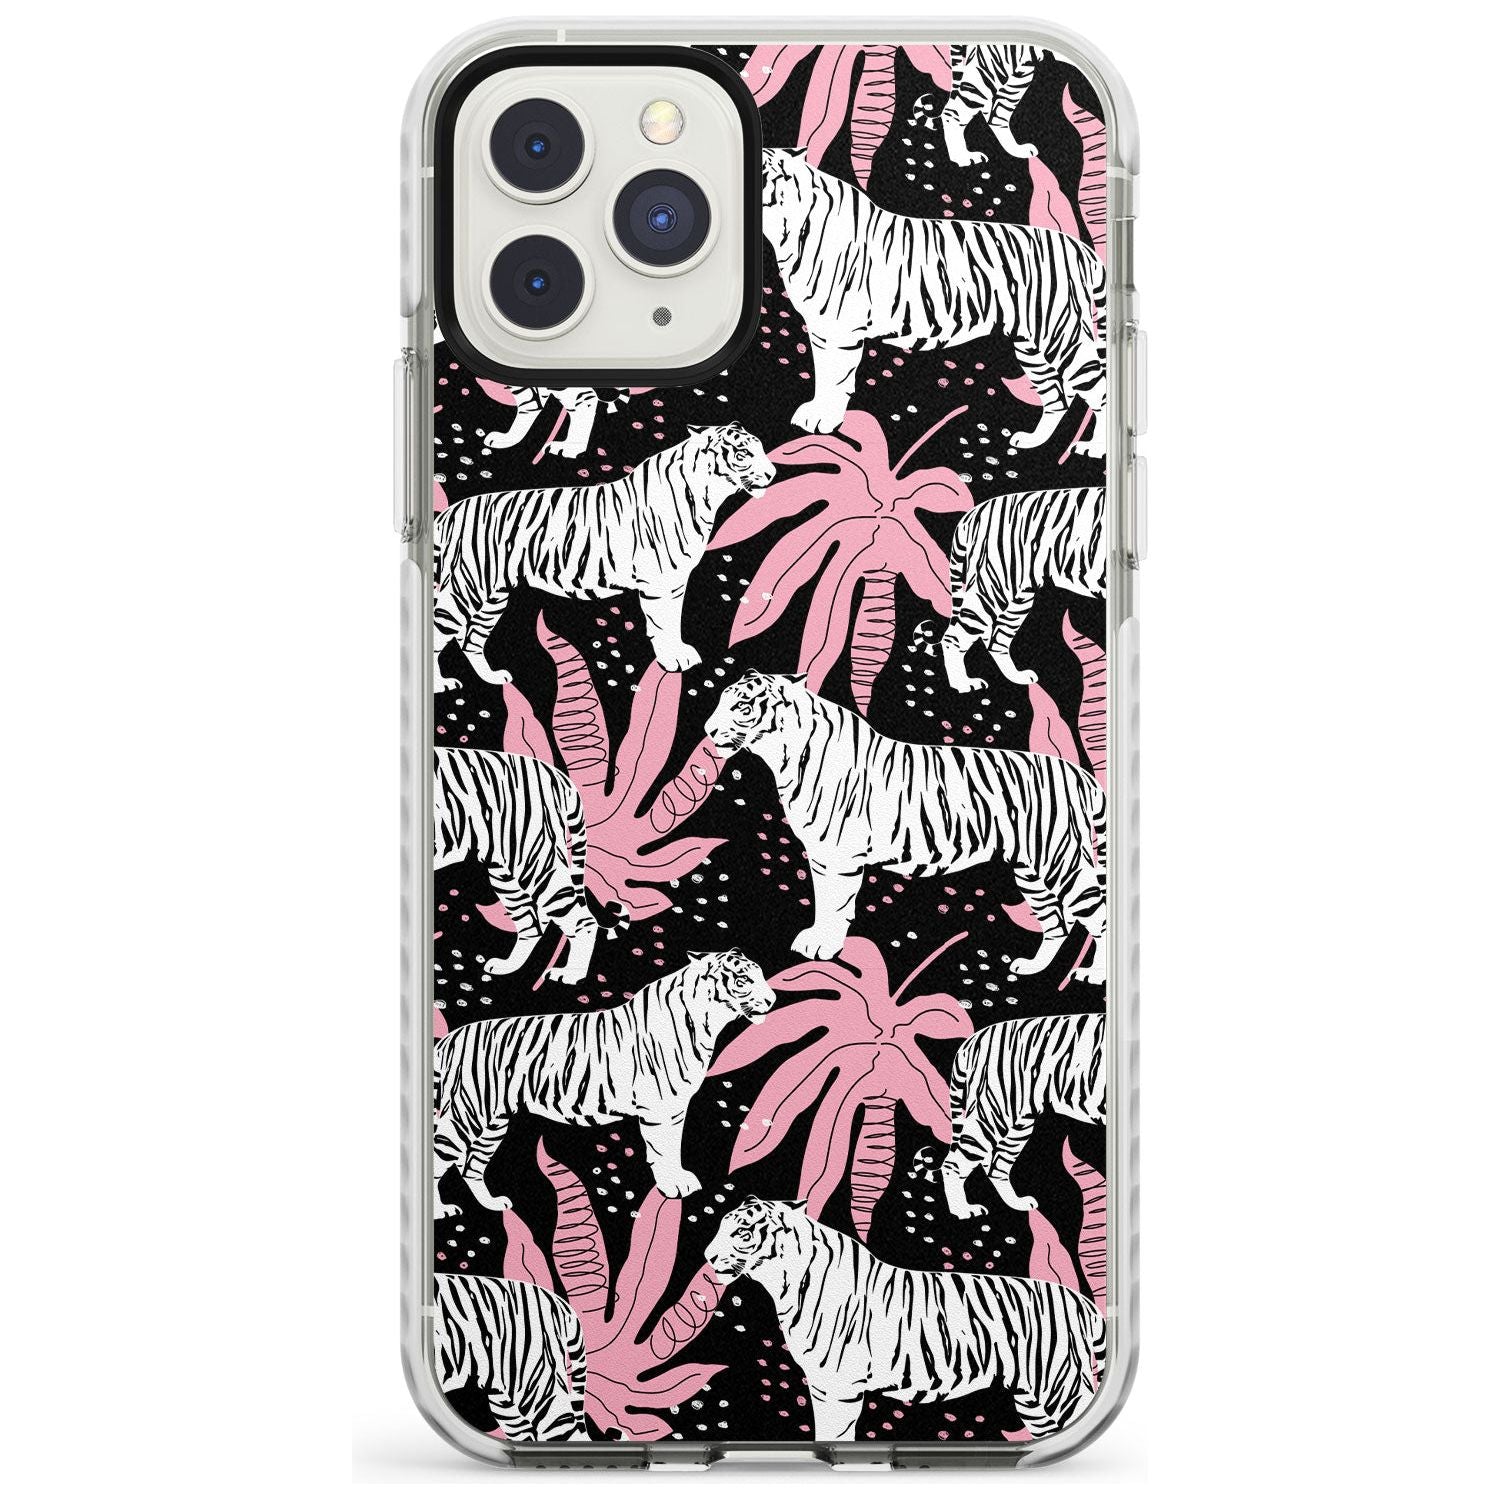 White Tigers on Black Pattern Impact Phone Case for iPhone 11 Pro Max